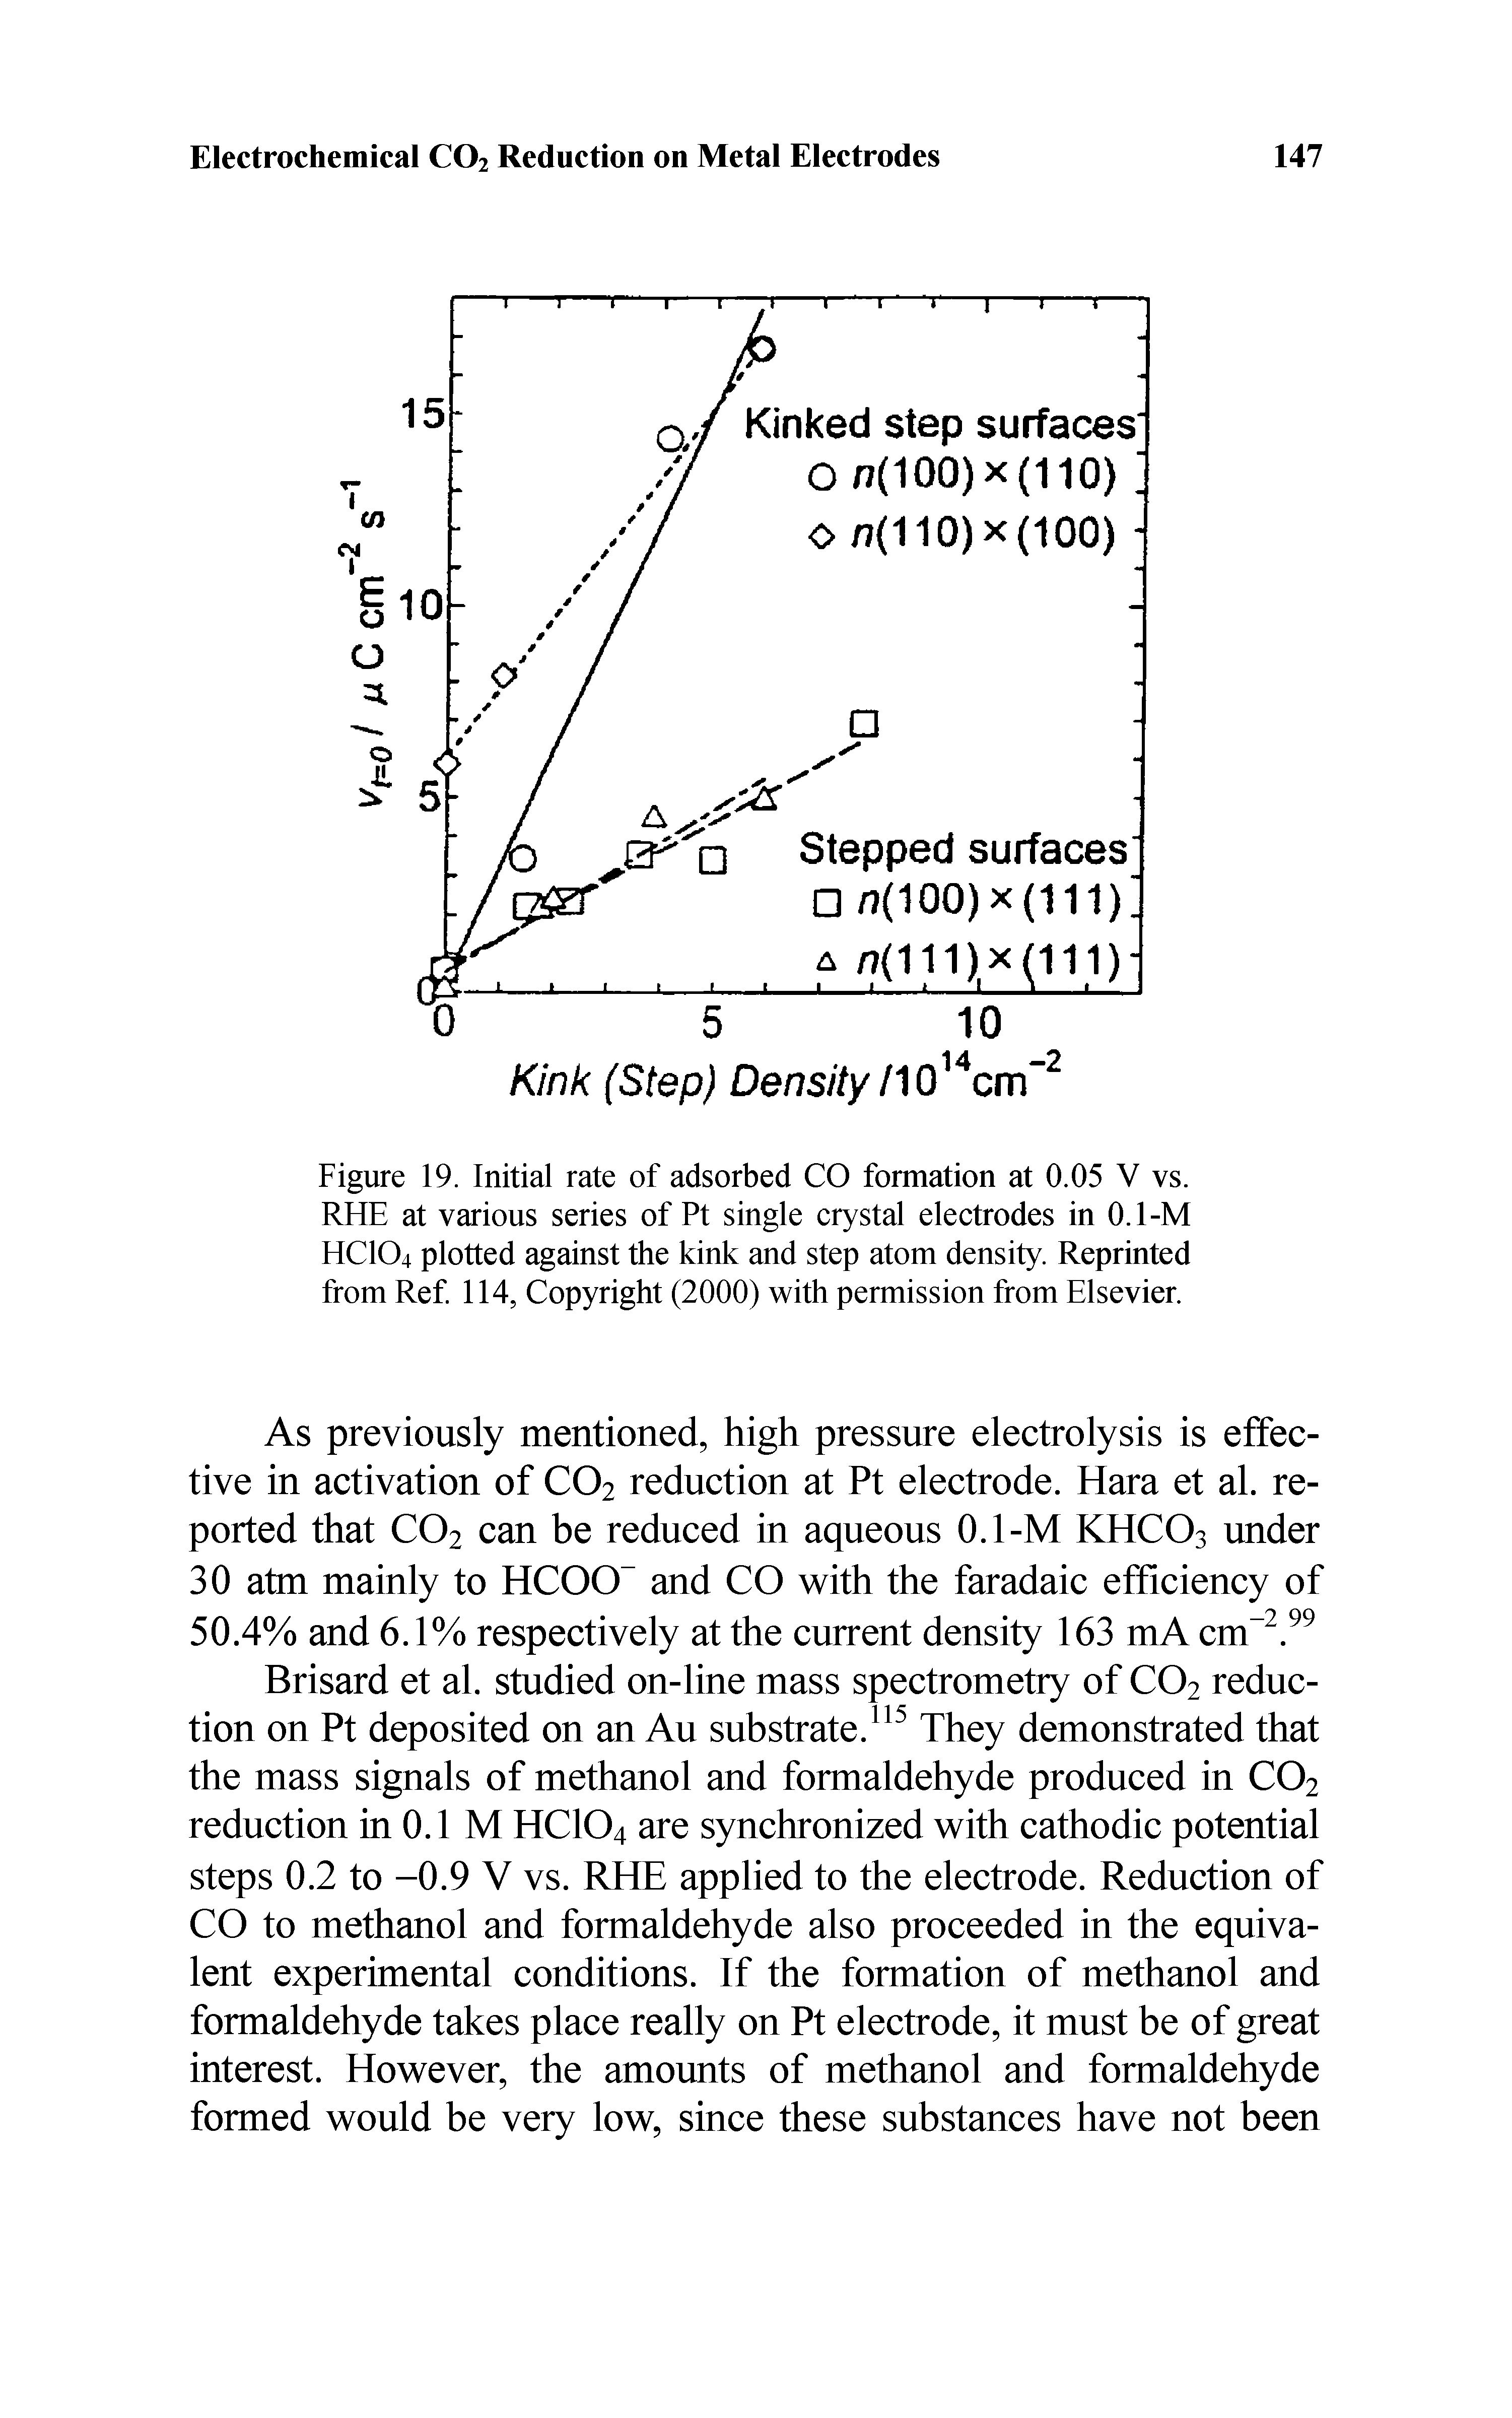 Figure 19. Initial rate of adsorbed CO formation at 0.05 V vs. RHE at various series of Pt single crystal electrodes in 0.1-M HCIO4 plotted against the kink and step atom density. Reprinted from Ref. 114, Copyright (2000) with permission from Elsevier.